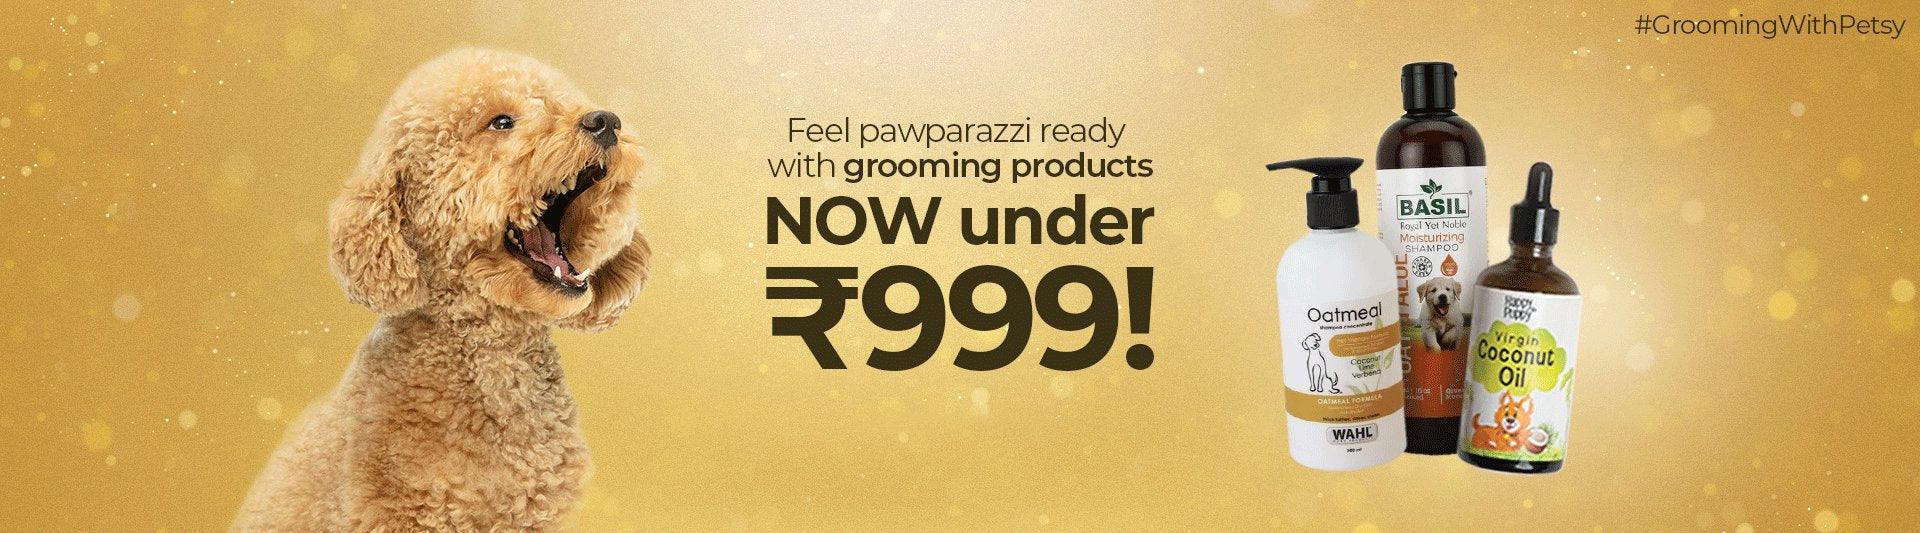 Grooming Products Under 999/- For Dogs - Petsy